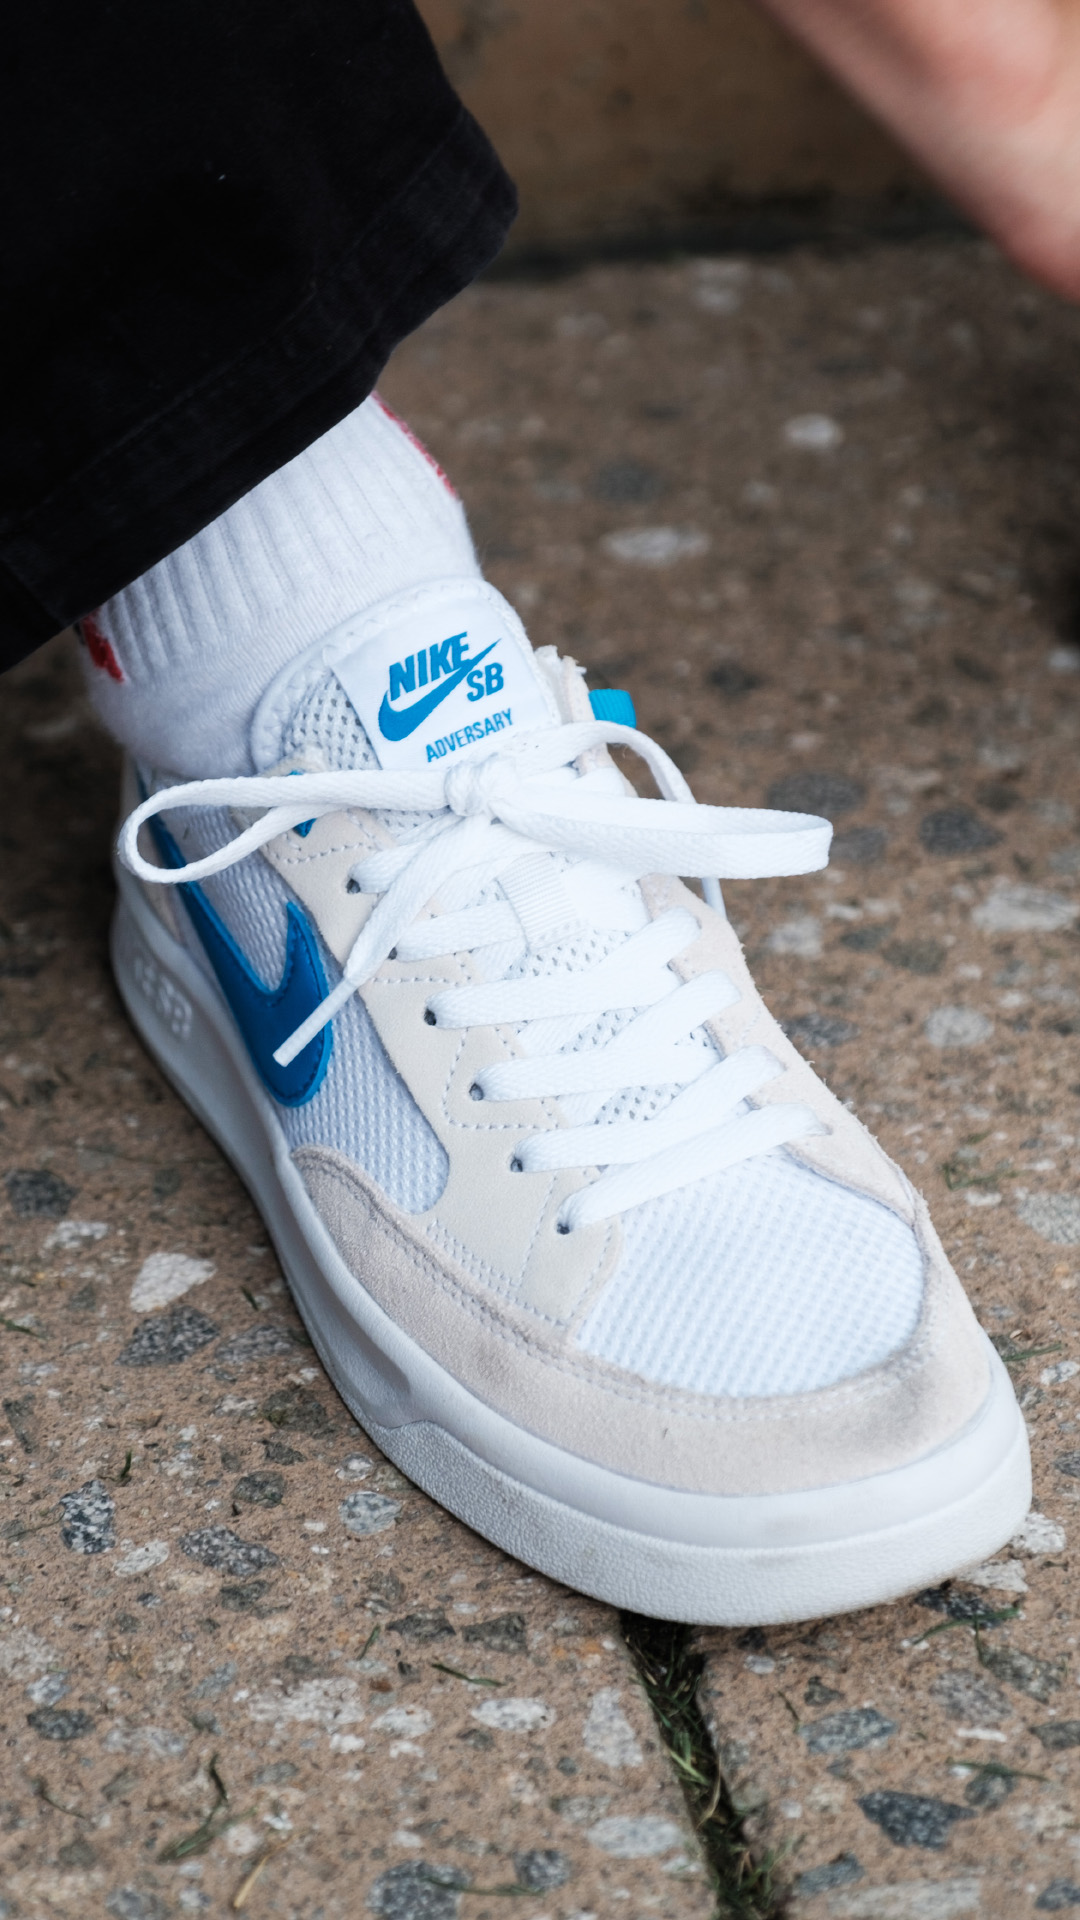 Vruchtbaar tank Ontkennen SKATEDELUXE on Twitter: "A vintage look &amp; proven Nike technology. We  took a closer look at the @nikesb Adversary. Check out our wear test. ⬛  https://t.co/7auiyIGn2k #skatedeluxe #SK8DLX https://t.co/a1Z9dJDhji" /  Twitter